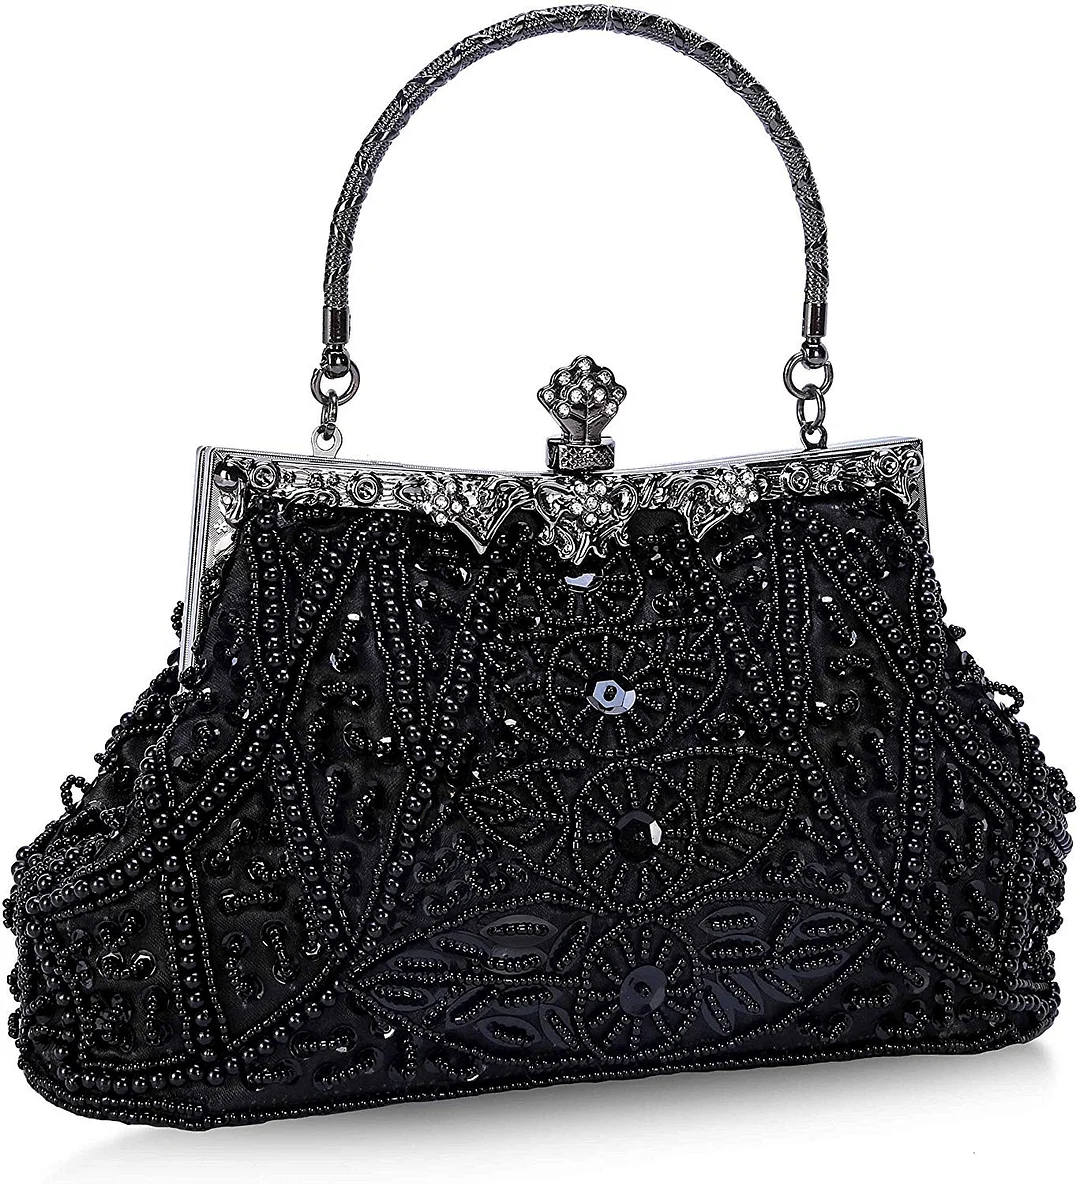 Evening Bag and Clutches for Women Beaded Sequin Wedding Purse Party Bridal Handbag